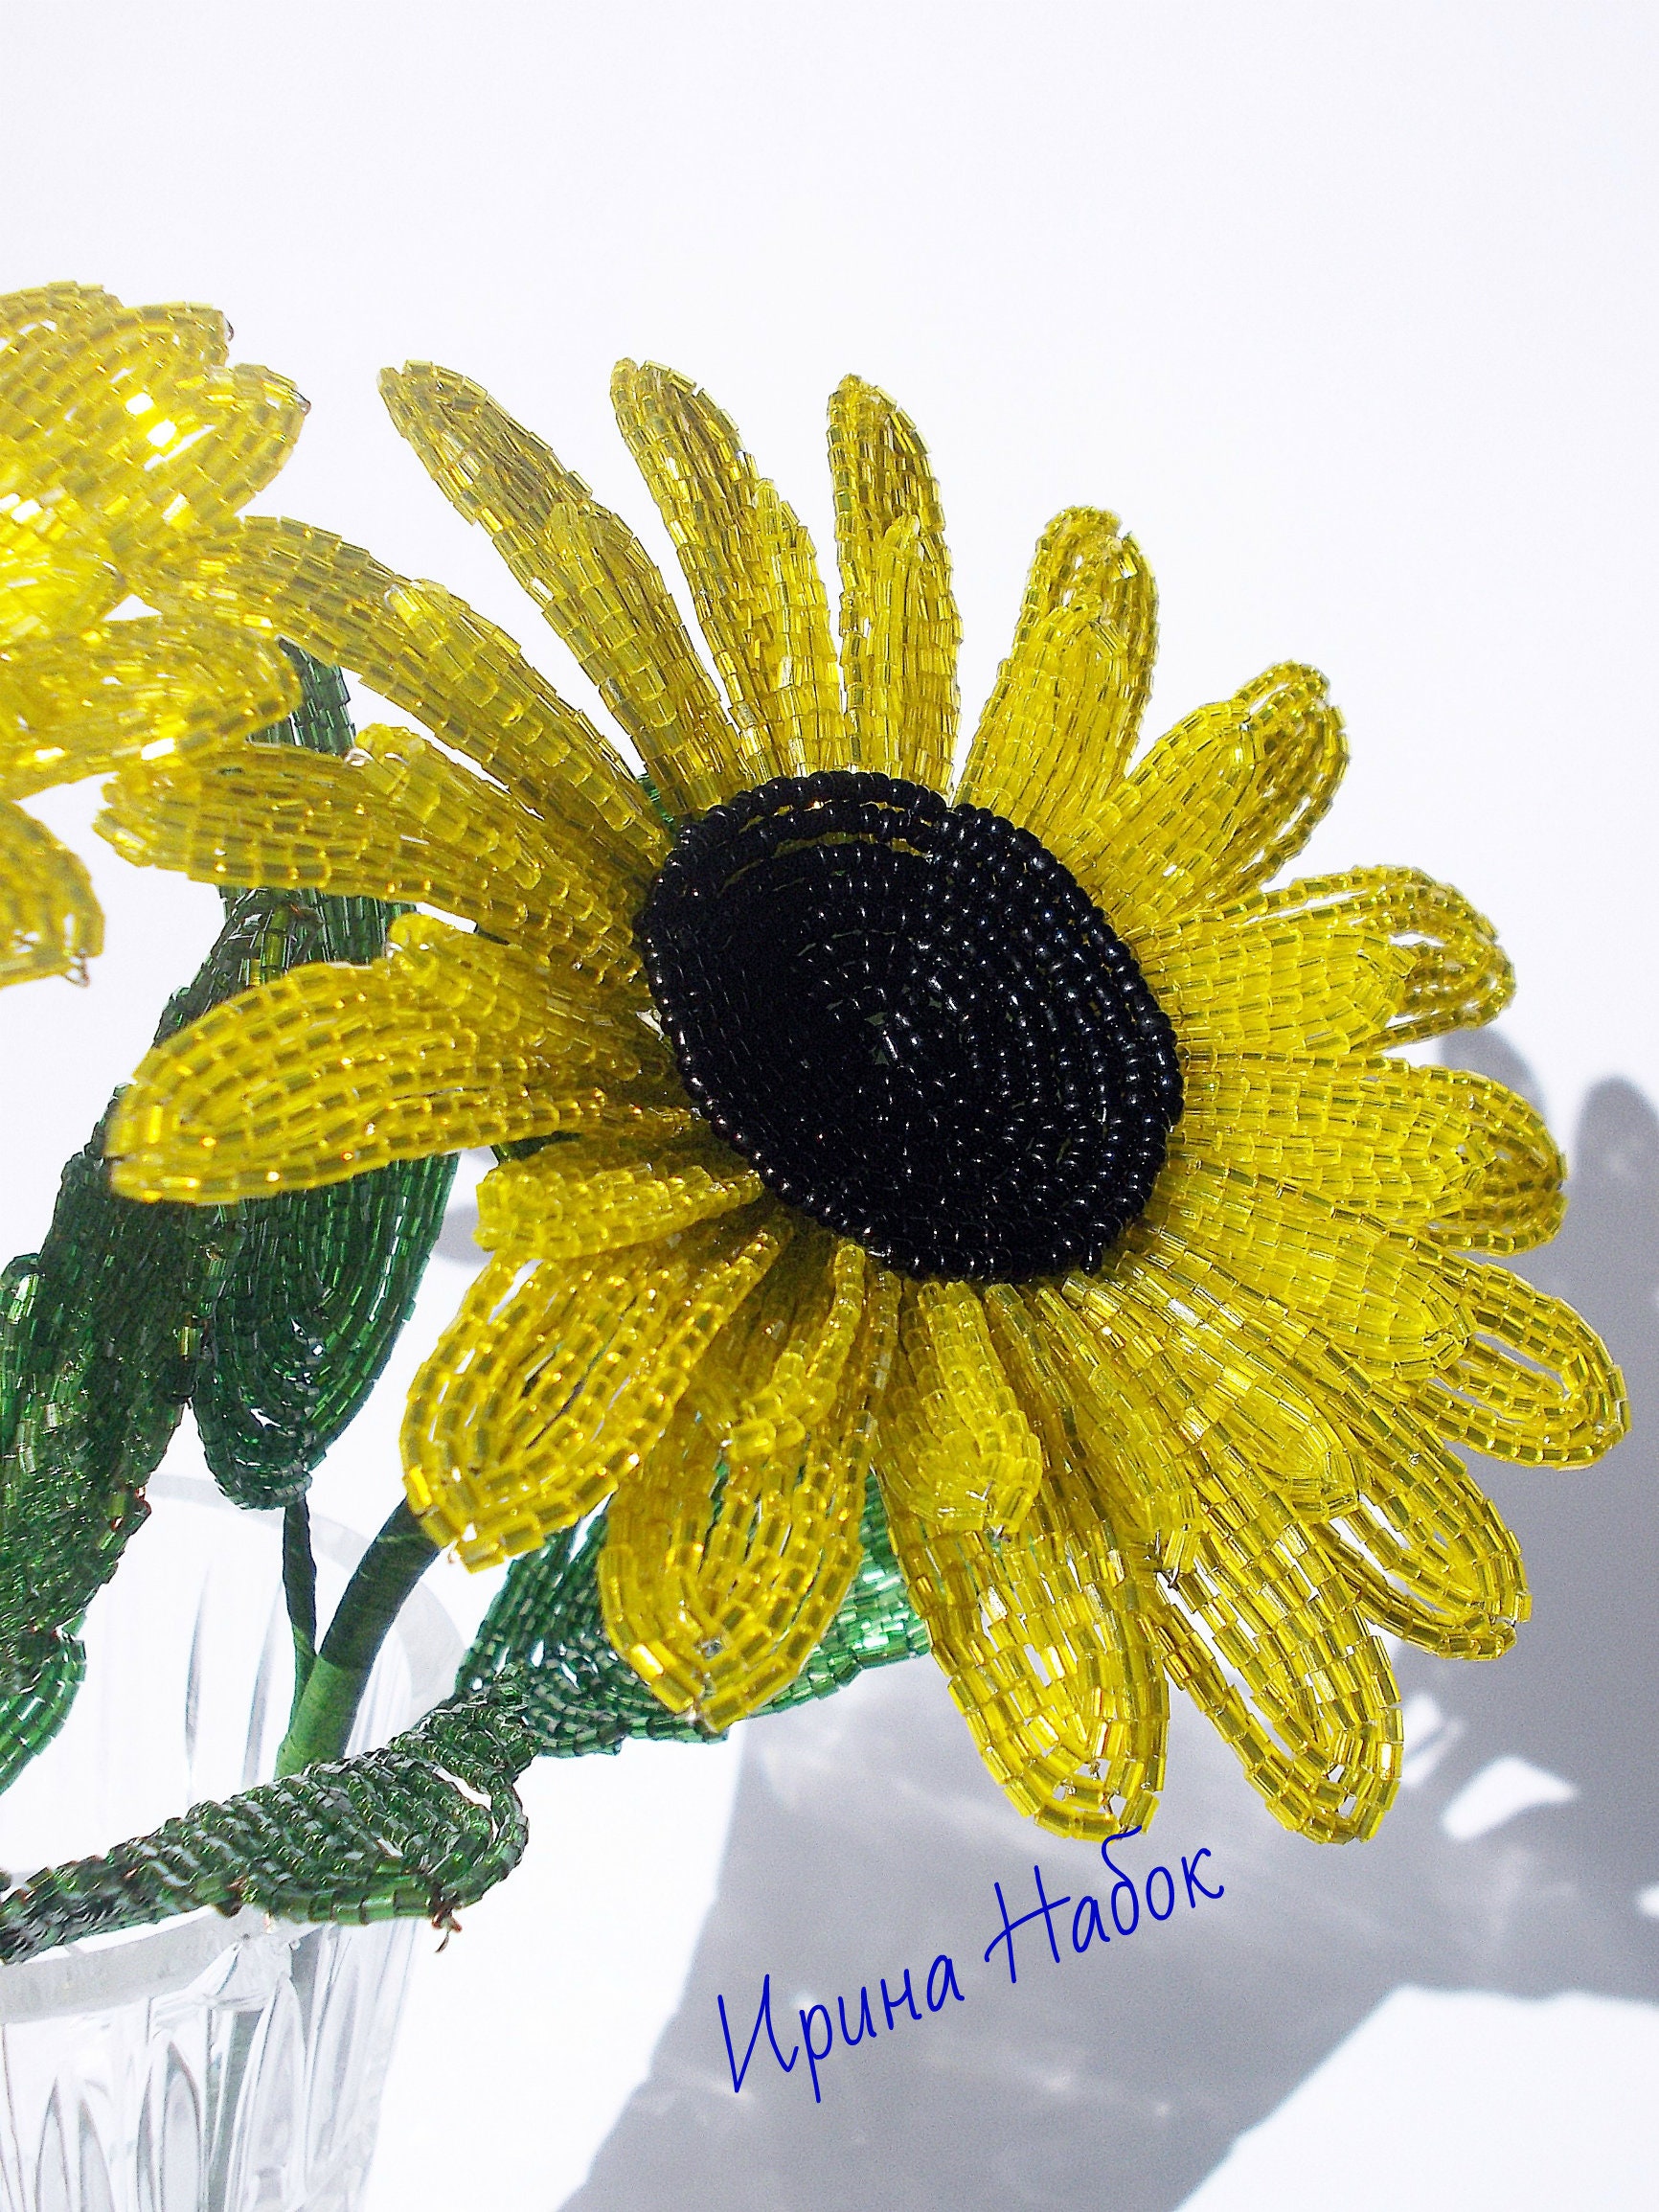 Beaded Flowers Sunflower From Beads Flowers for a Decor - Etsy